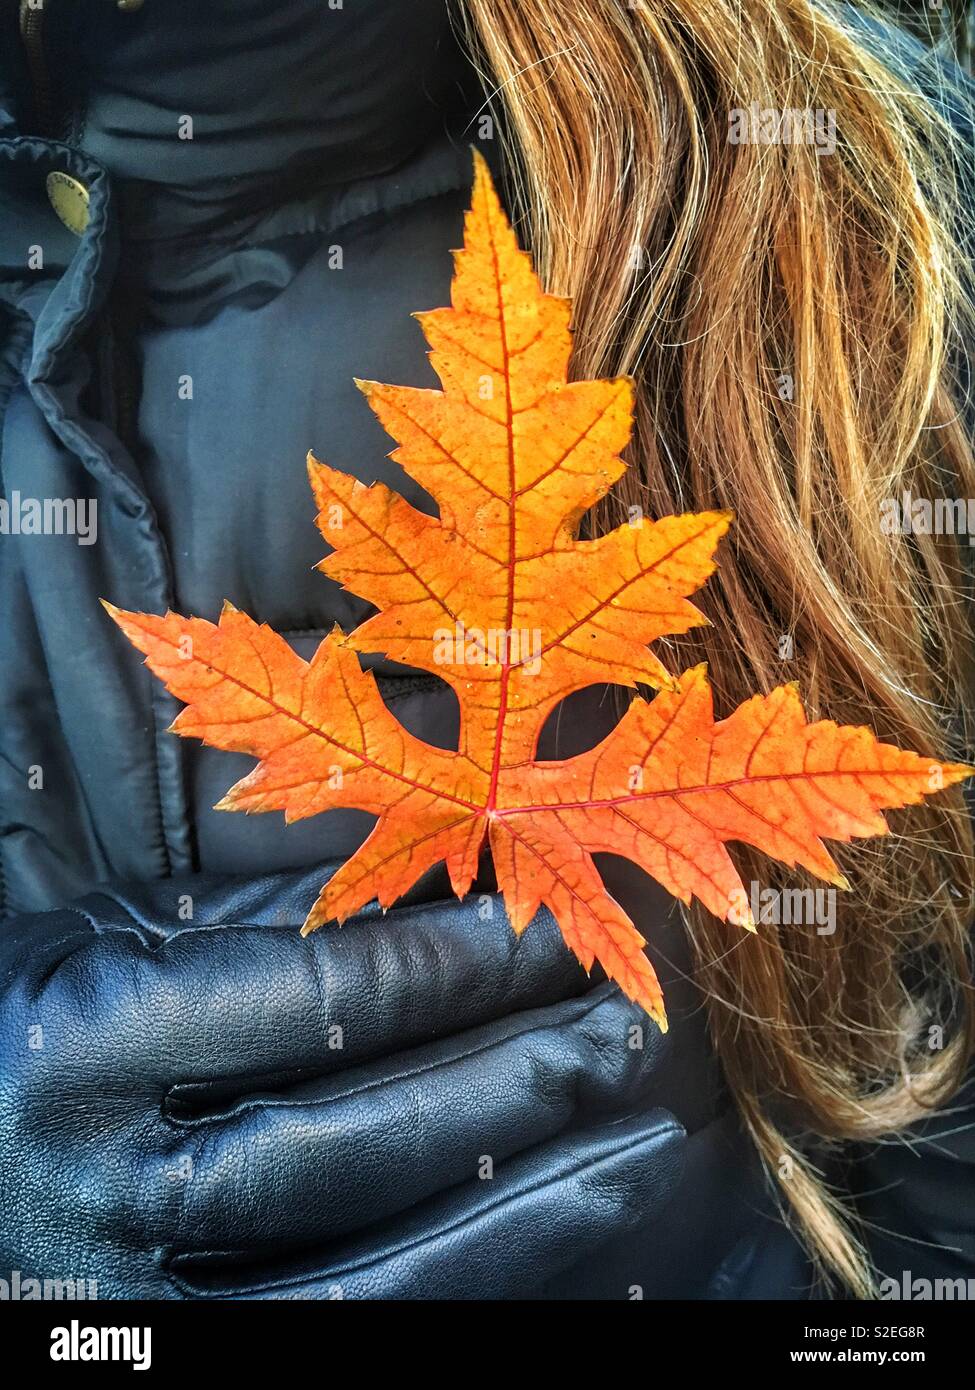 Woman walking finds a fall leaf  as winter approaches Stock Photo